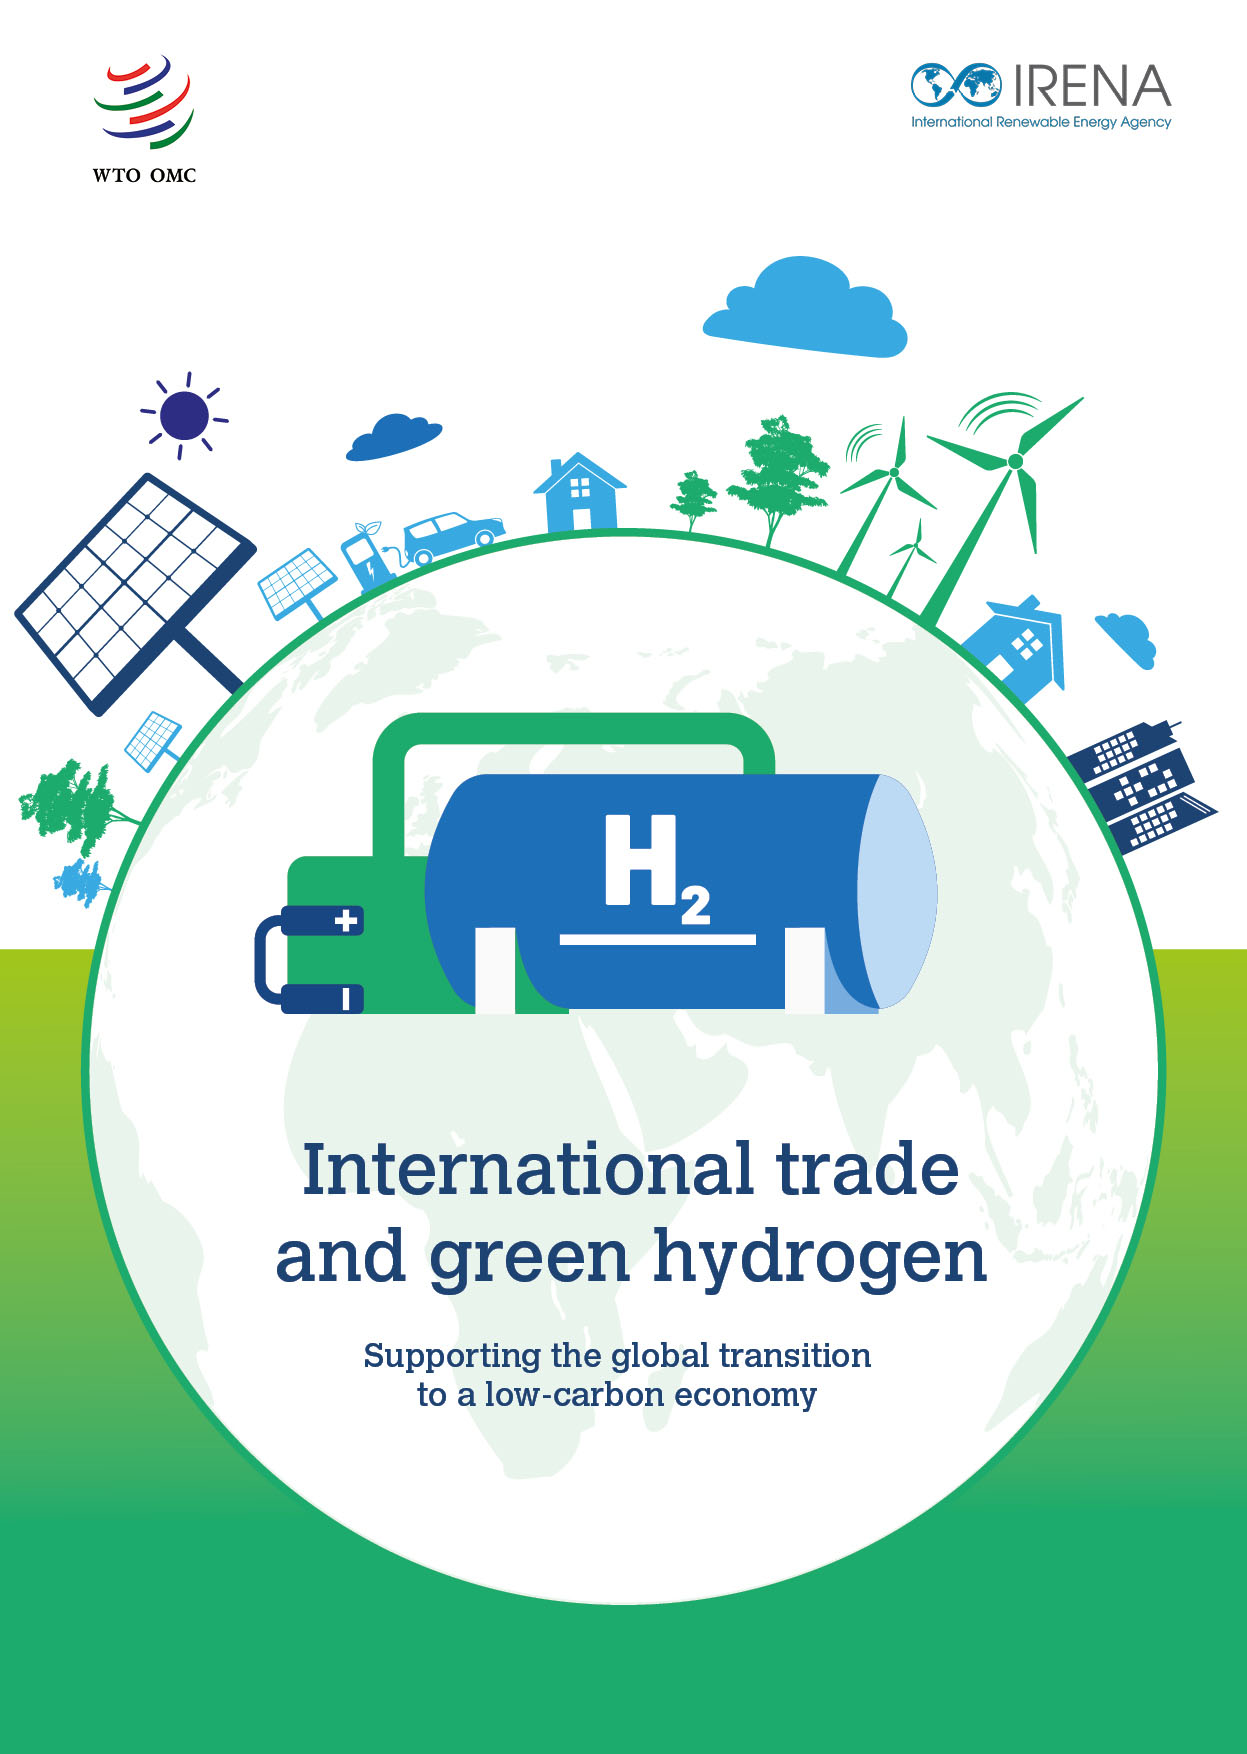 image of Trade-related policies along the hydrogen value chain